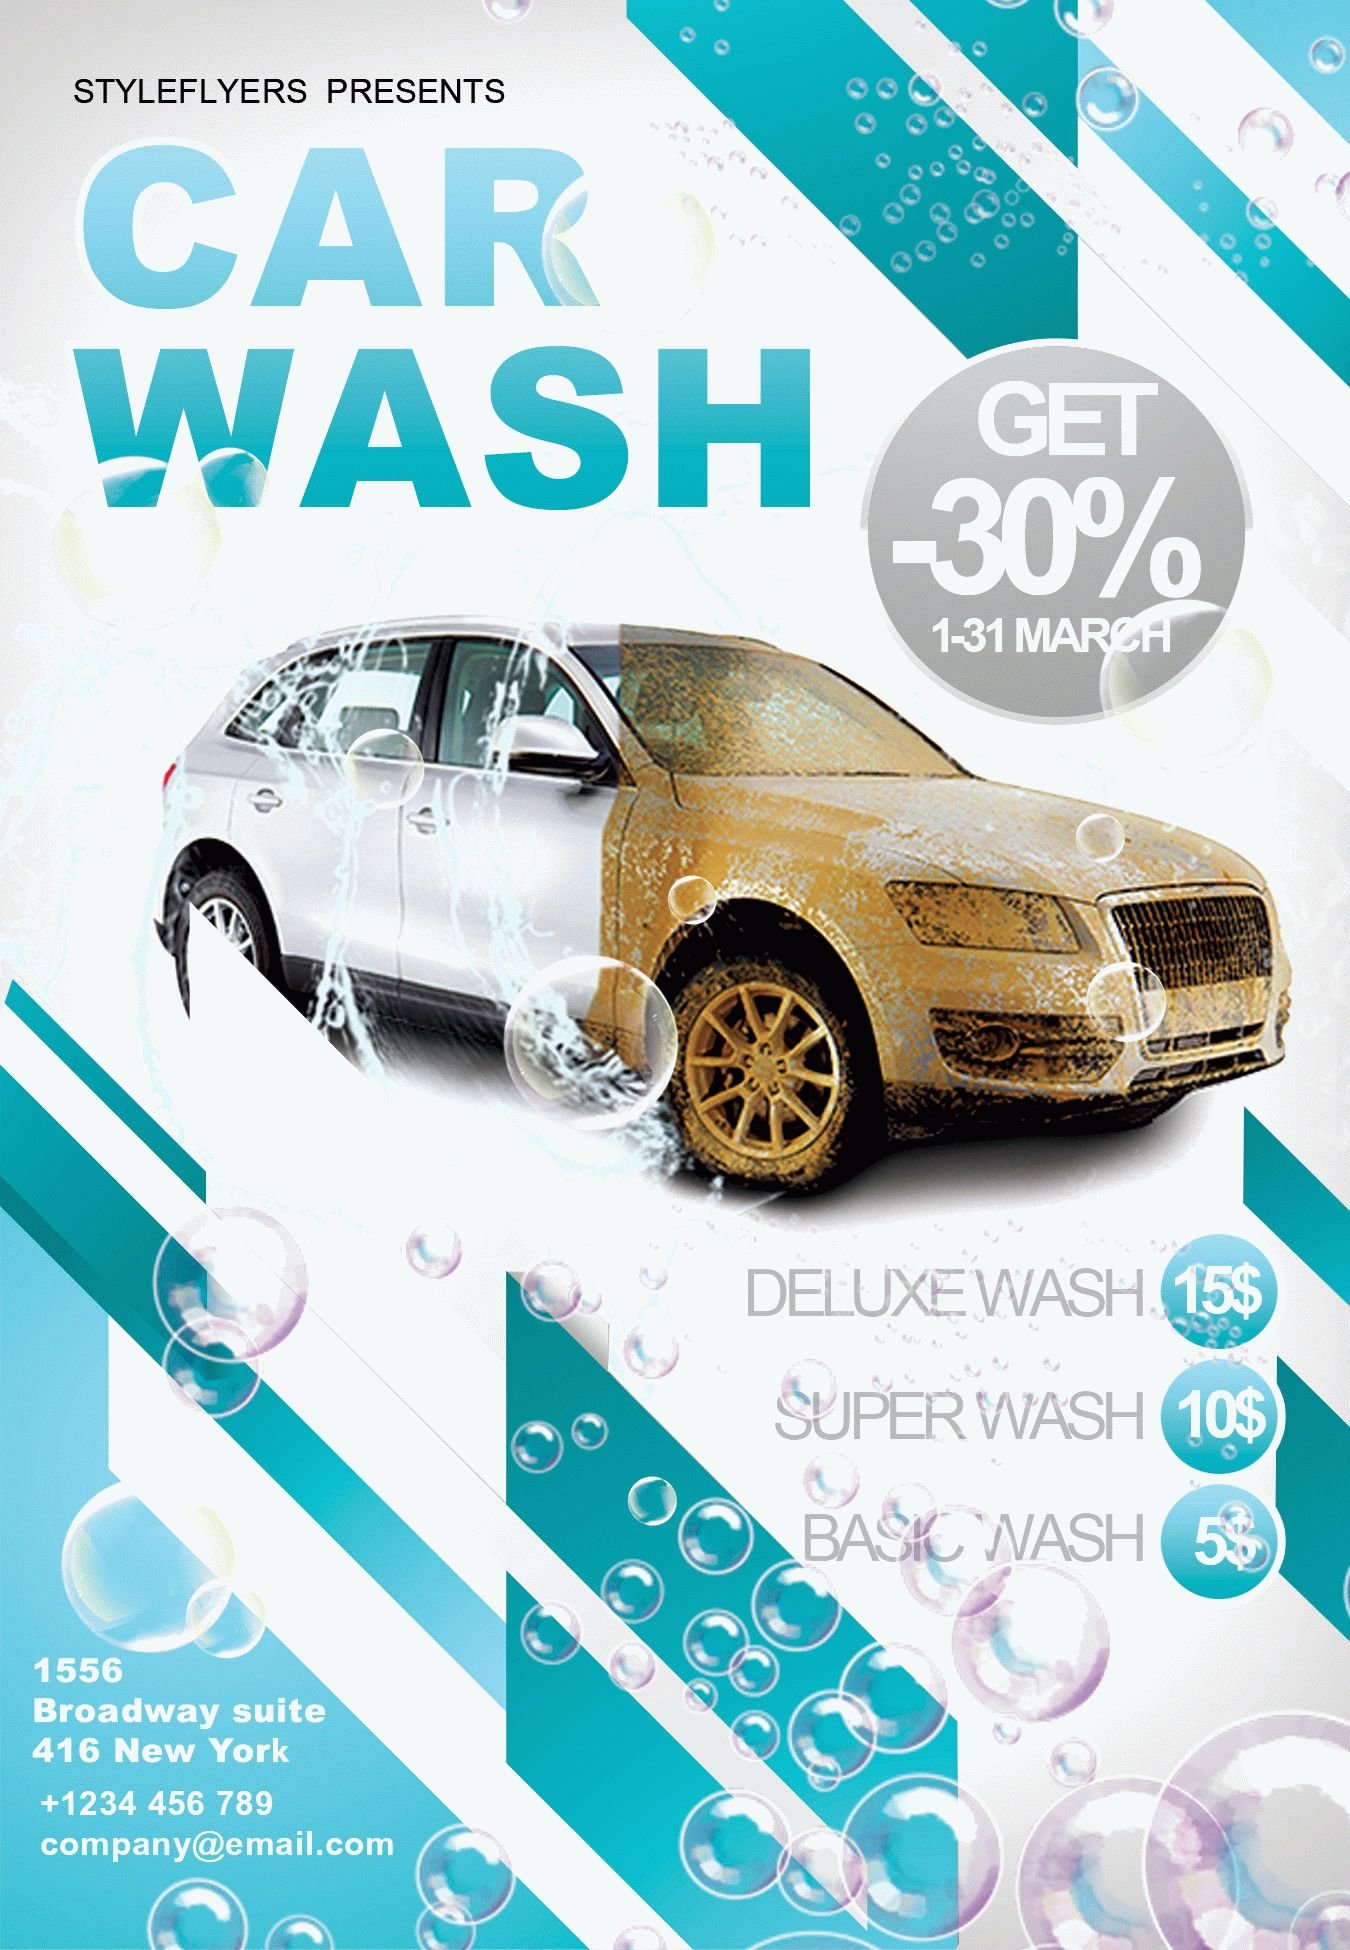 car-wash-psd-flyer-template-style-flyers-psd-templates-download